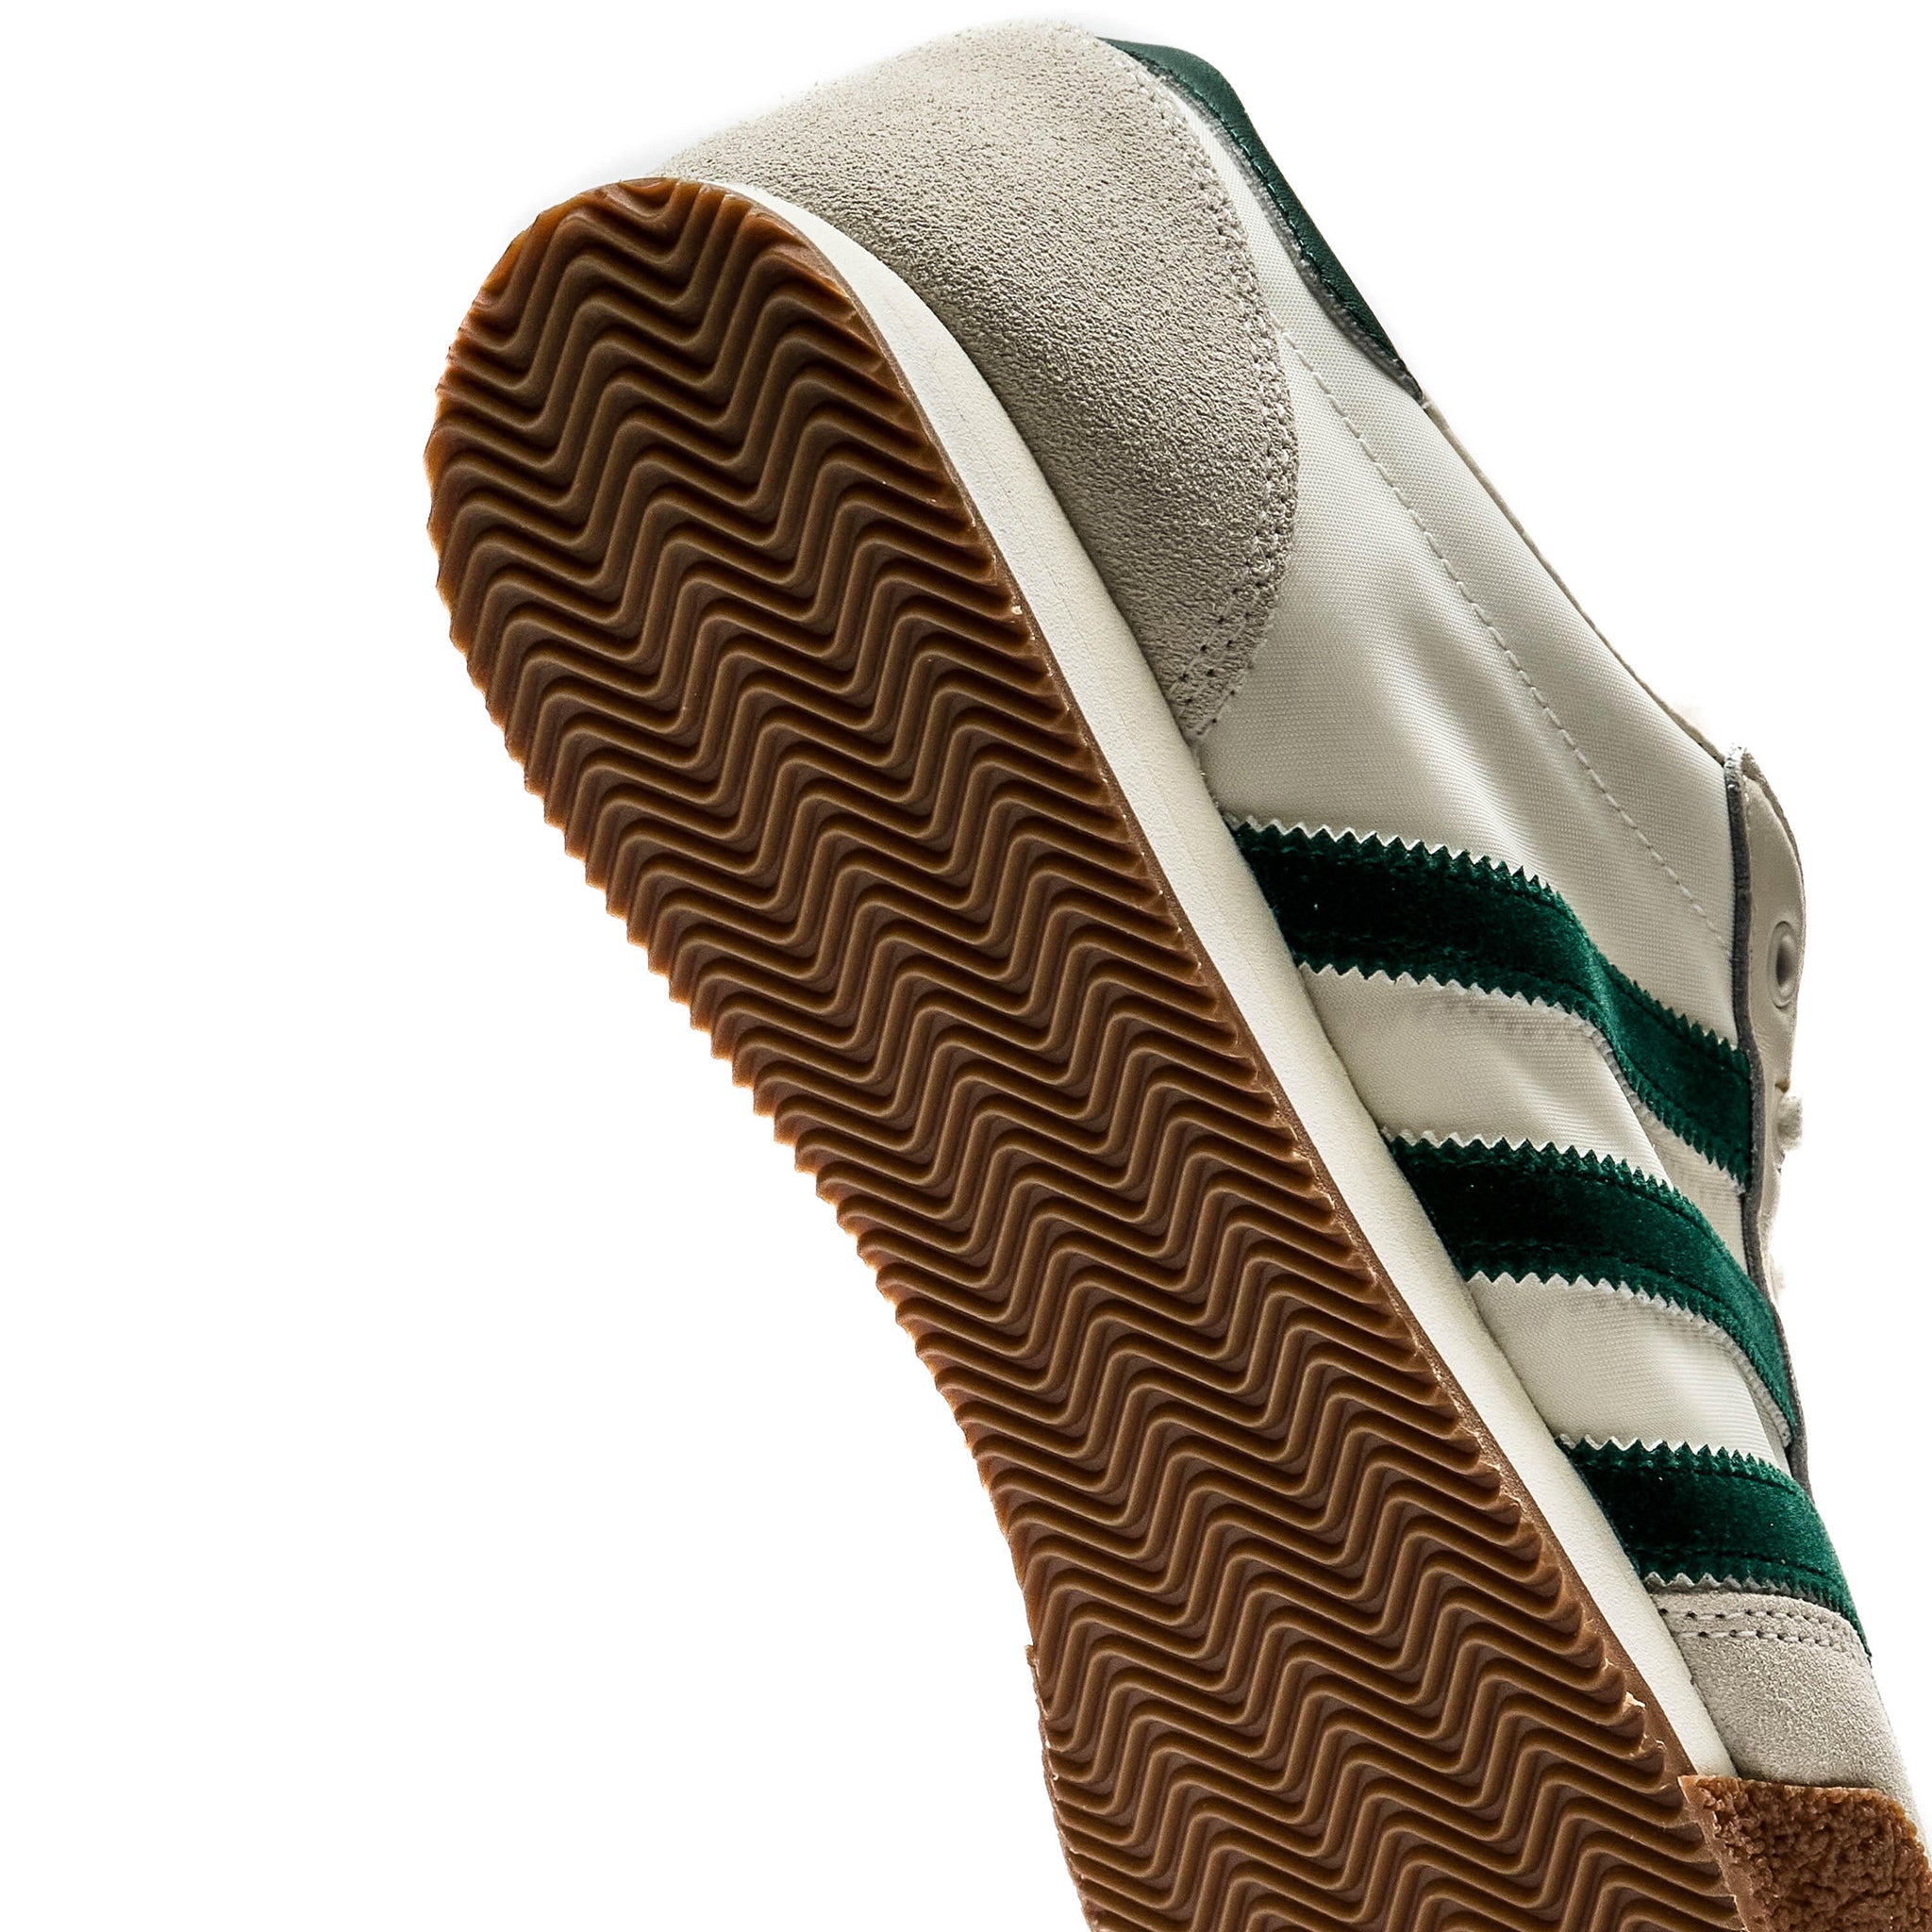 Sole View of Liam Gallagher x Adidas Spezial LG2 Bottle Green IF8358